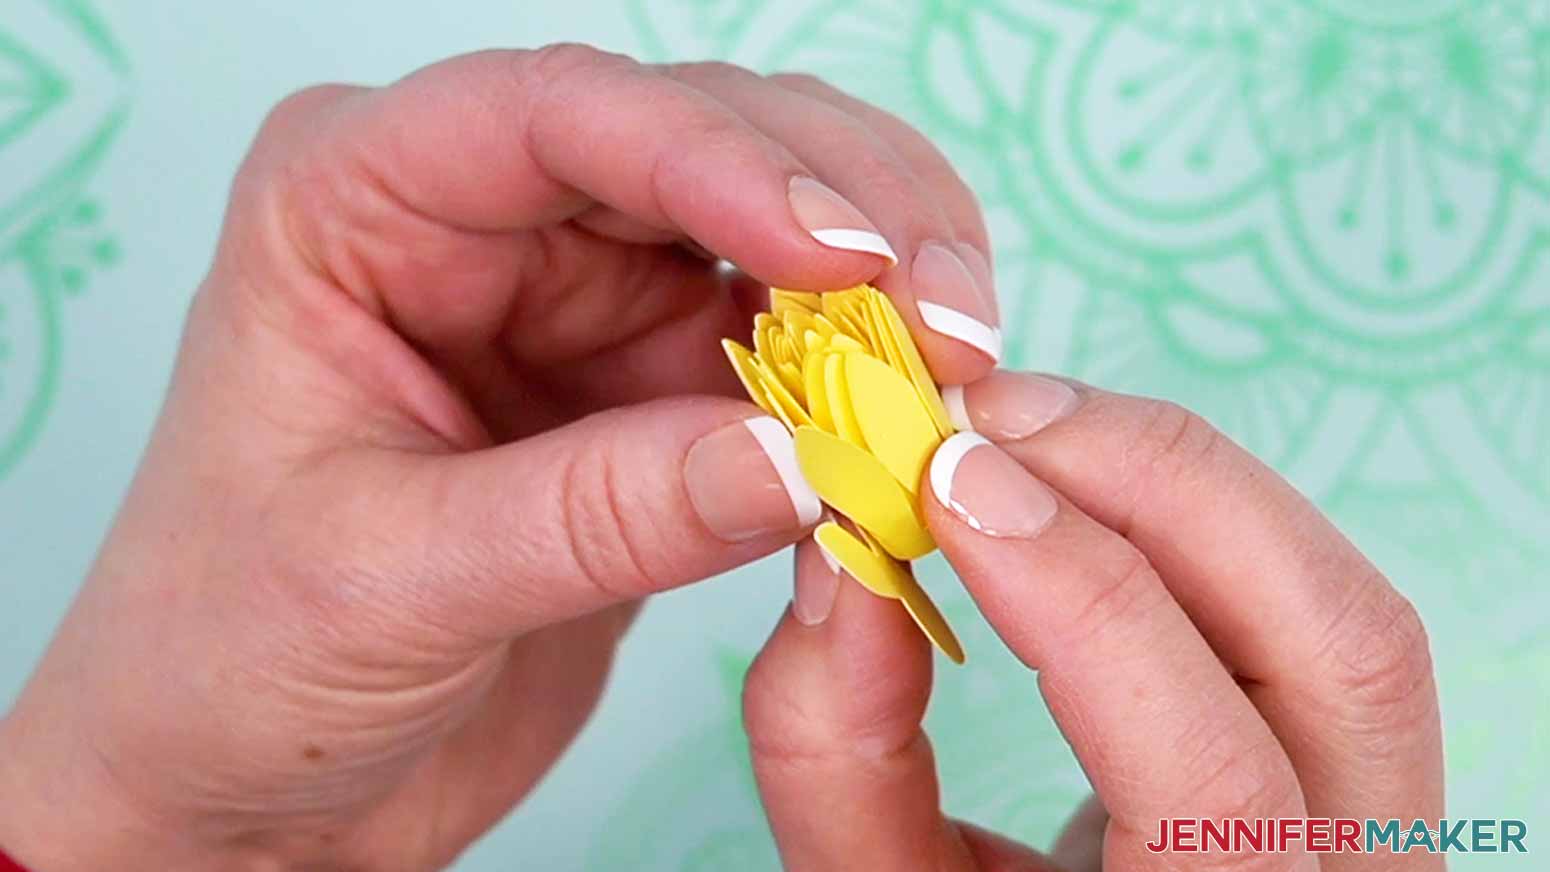 Remove the flower from the tool and hold it tightly in place so the petals do not unravel.